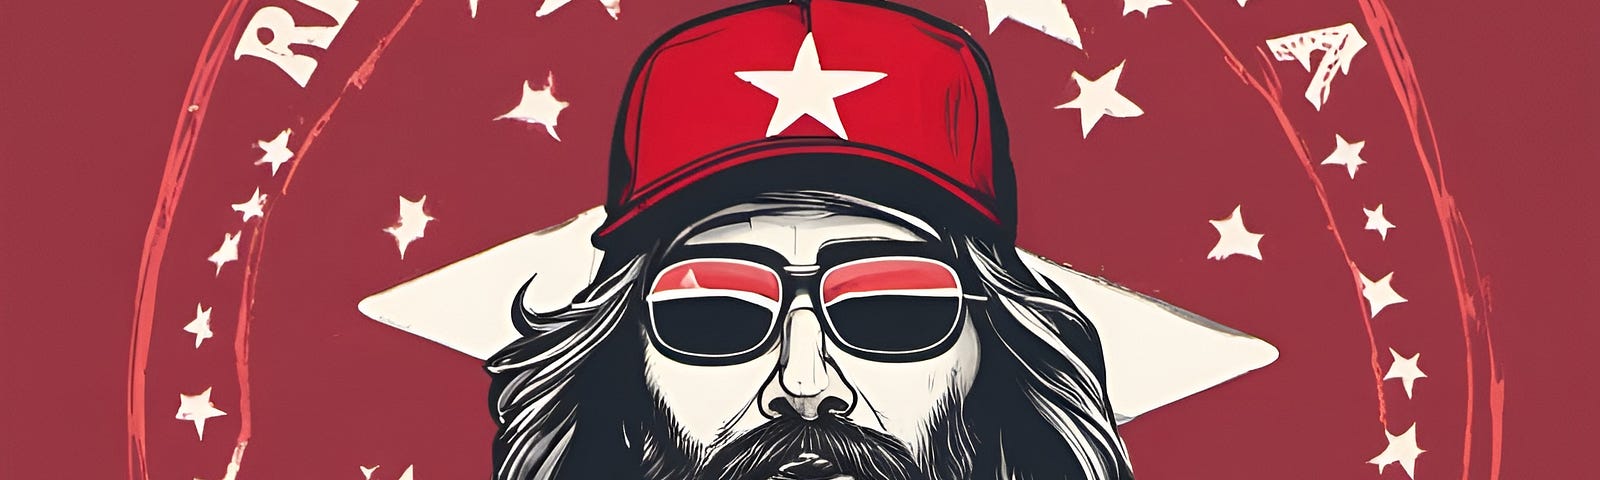 a man who looks like Jesus in sunglasses and a red baseball cap